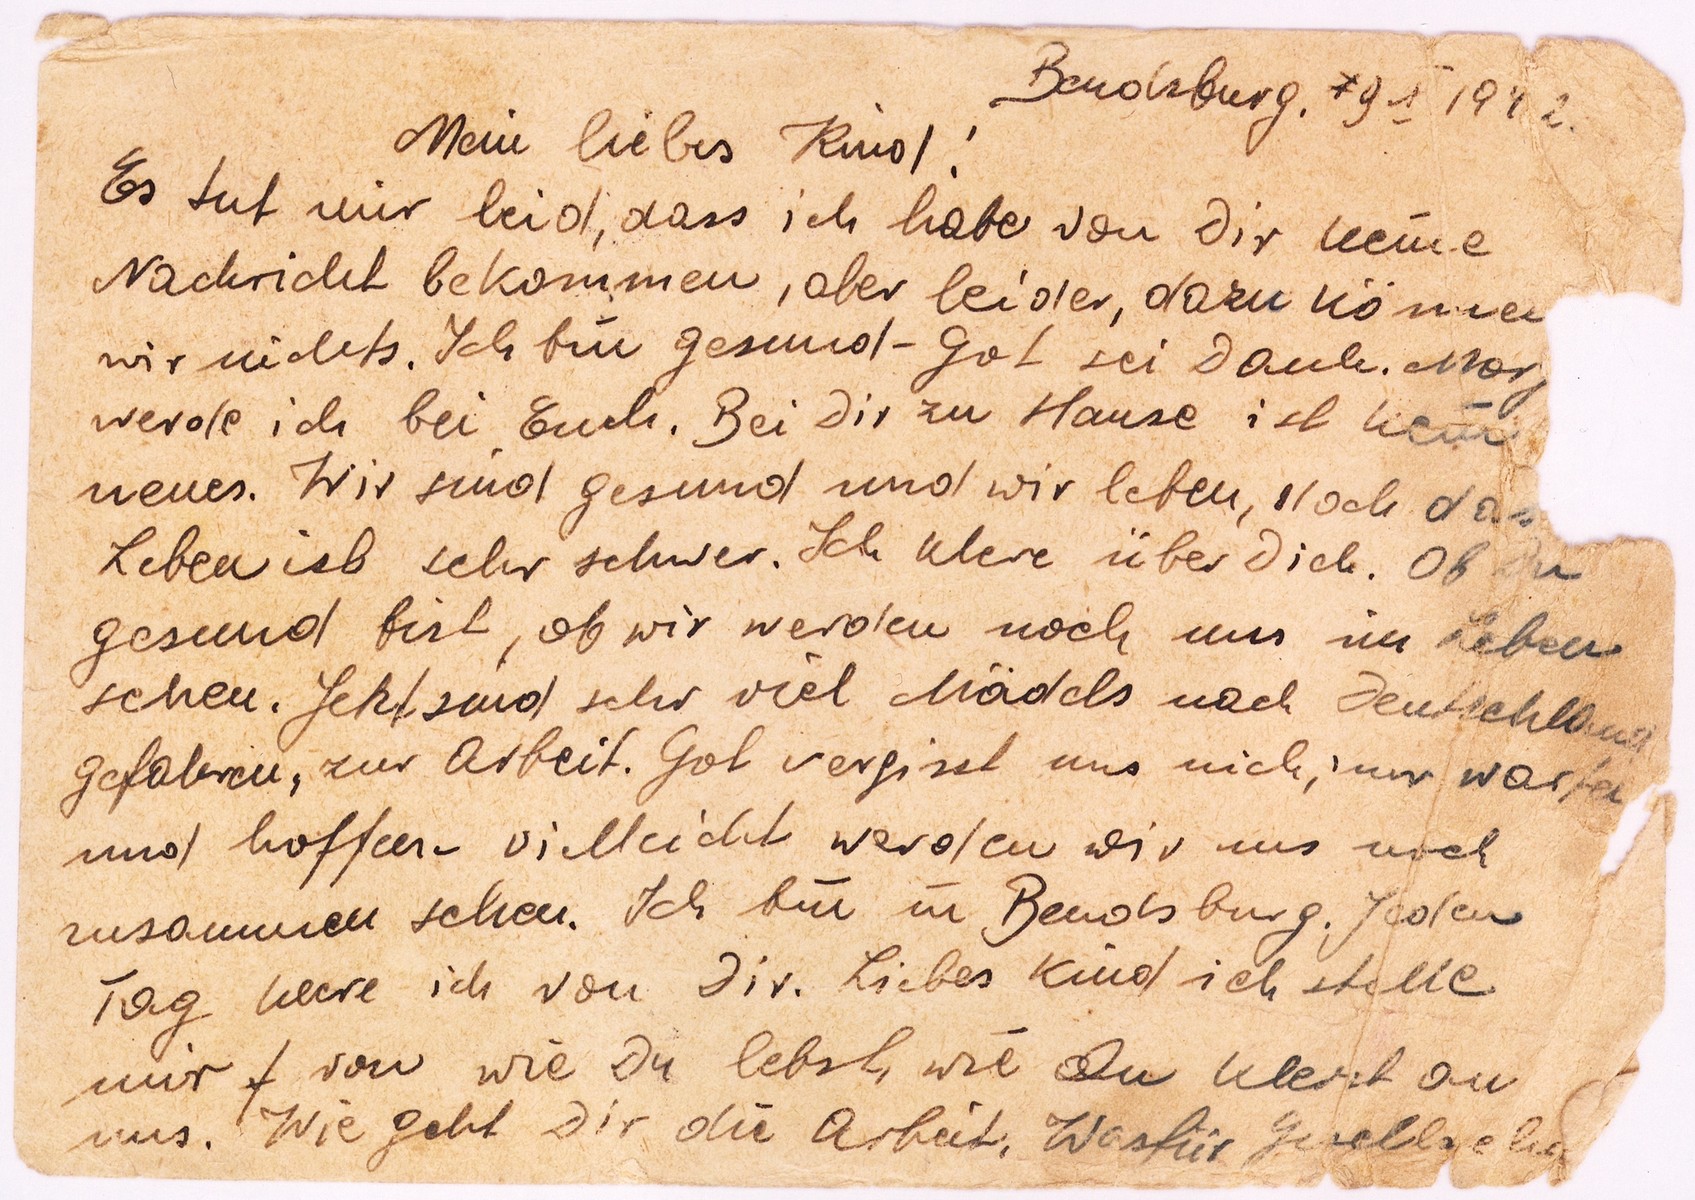 A postcard written by Regina Szajnerman in the Dabrowa ghetto to her niece Hanka Chana Wajntraub, imprisoned in the Gruenberg (Zielona Gora) labor/concentration camp. 

The postcard was mailed from Bedzin on October 10, 1942.  Regina Szajnerman perished in unknown circumstances. Hanka survived the Gruenberg camp and a death march to Bergen Belsen. She kept the postcard from her aunt in her shoes until the liberation in April 1945.